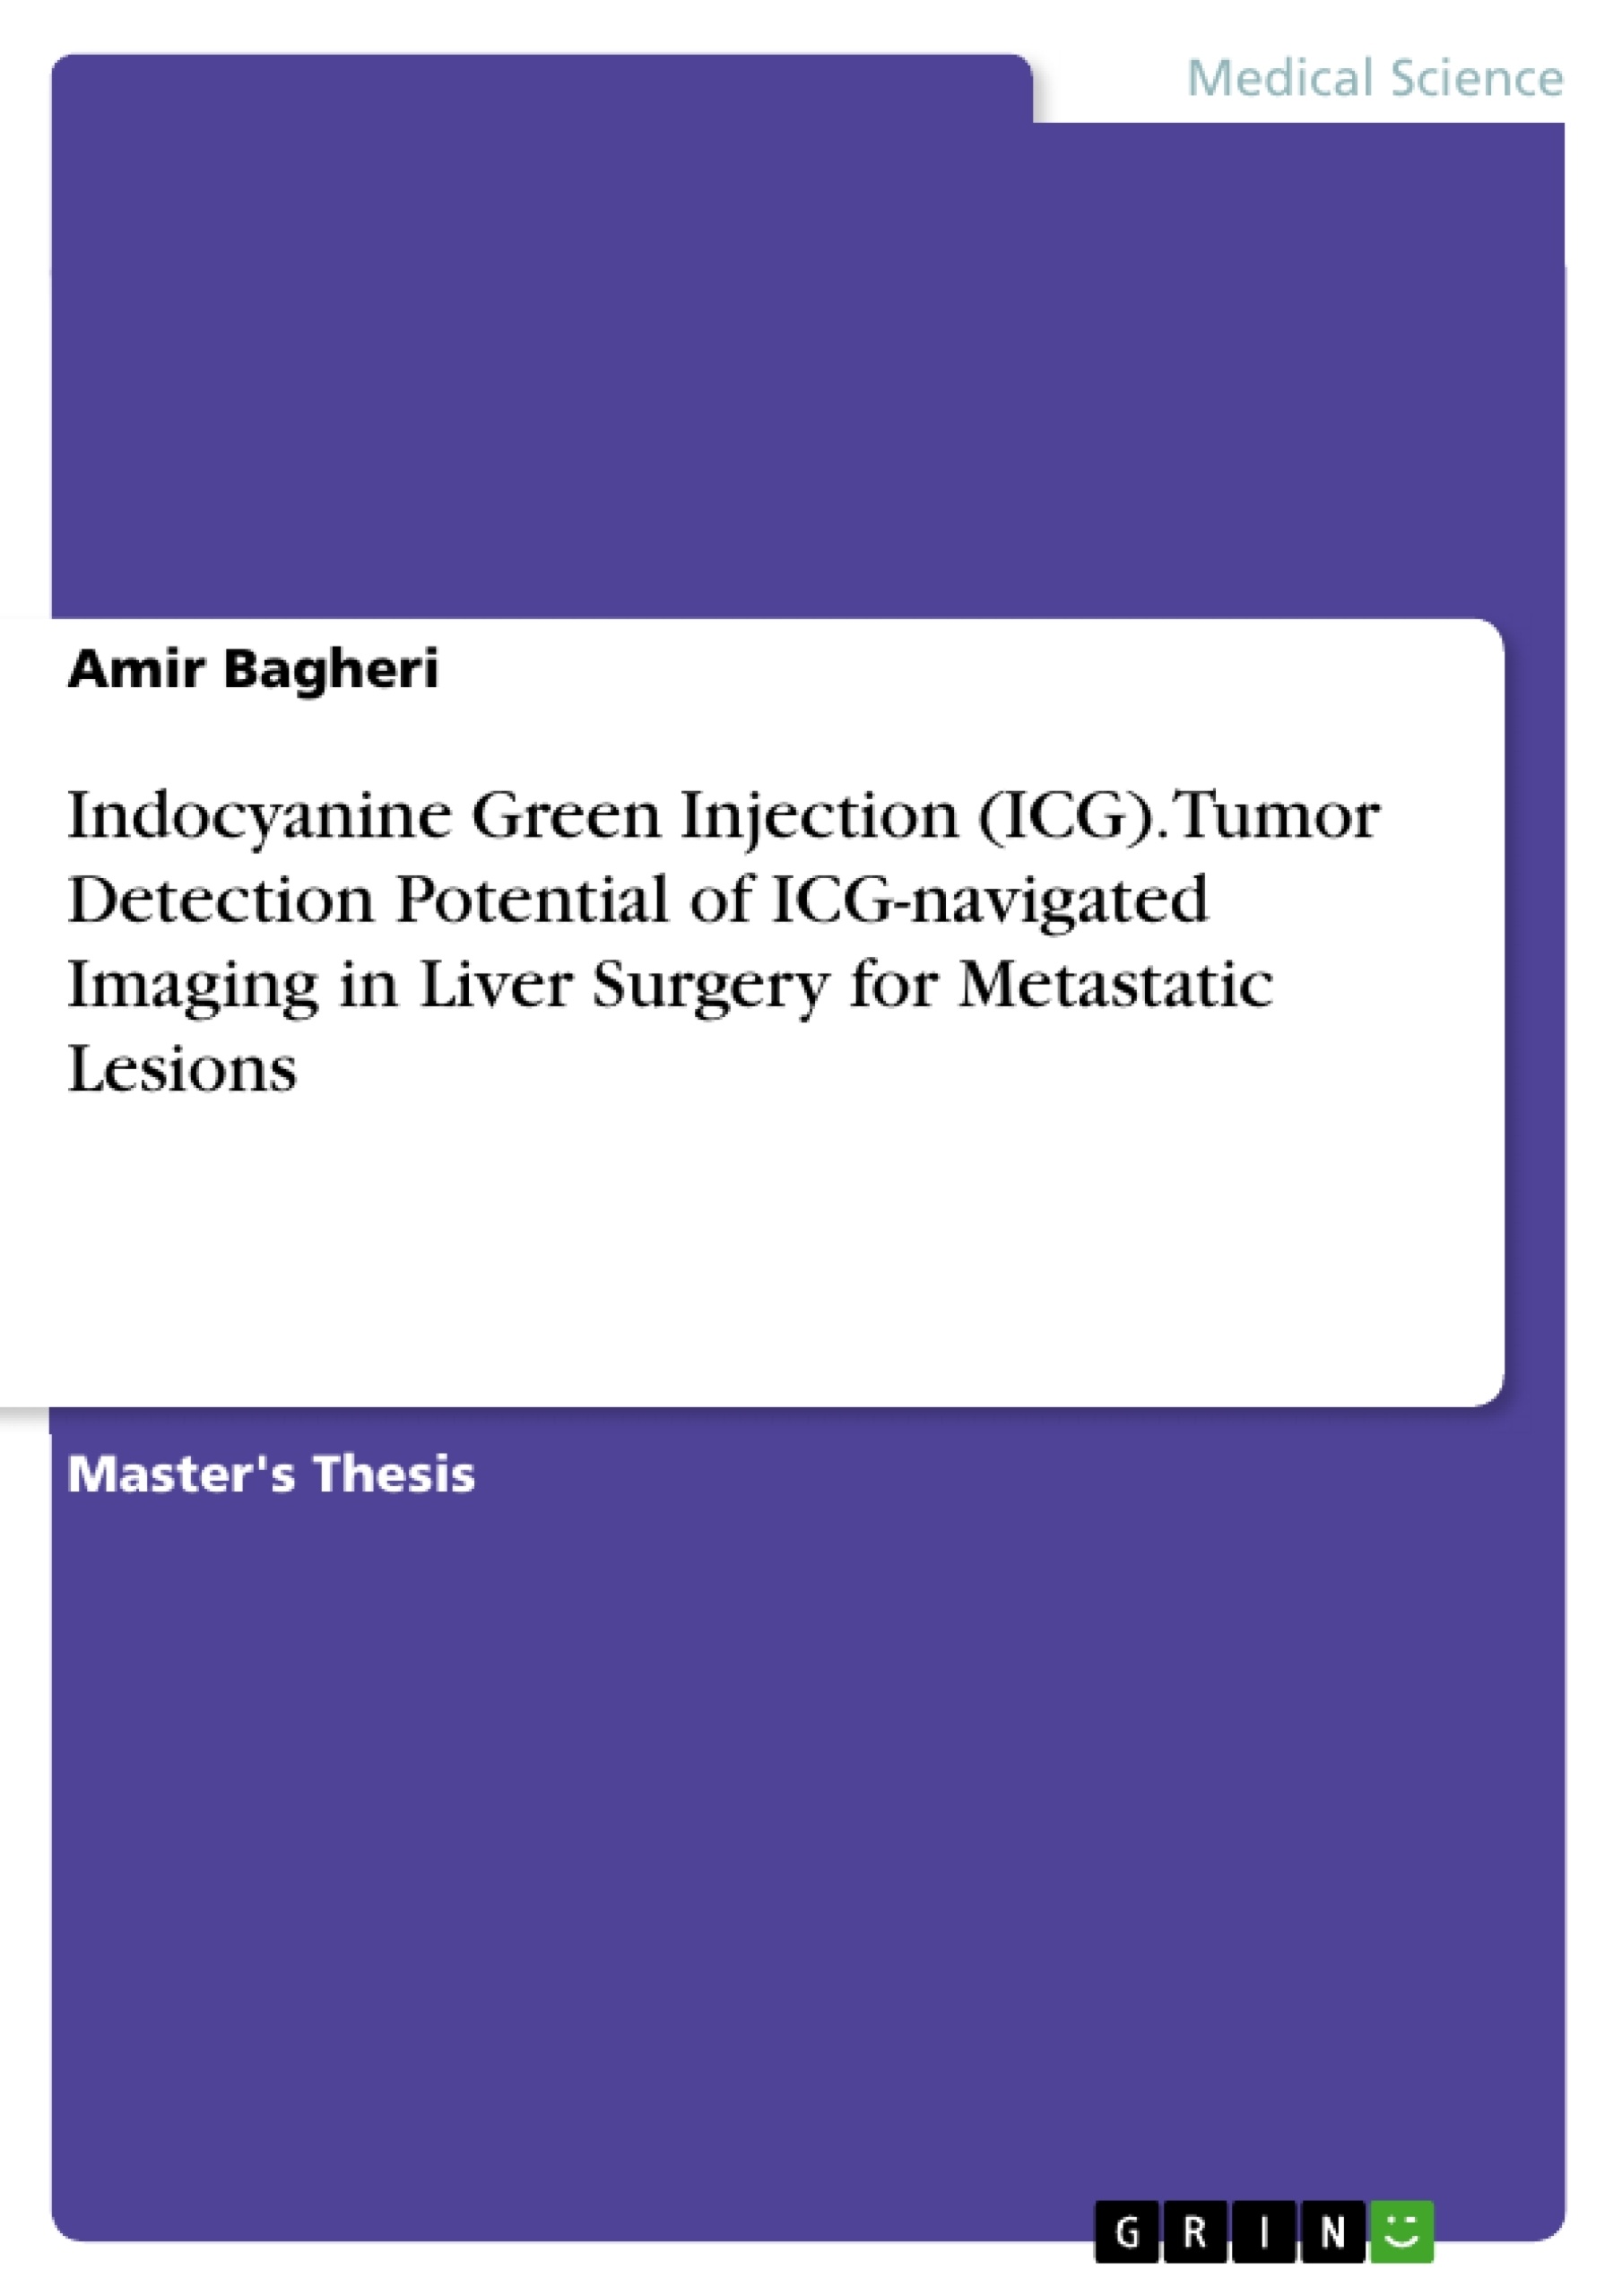 Title: Indocyanine Green Injection (ICG). Tumor Detection Potential of ICG-navigated Imaging in Liver Surgery for Metastatic Lesions